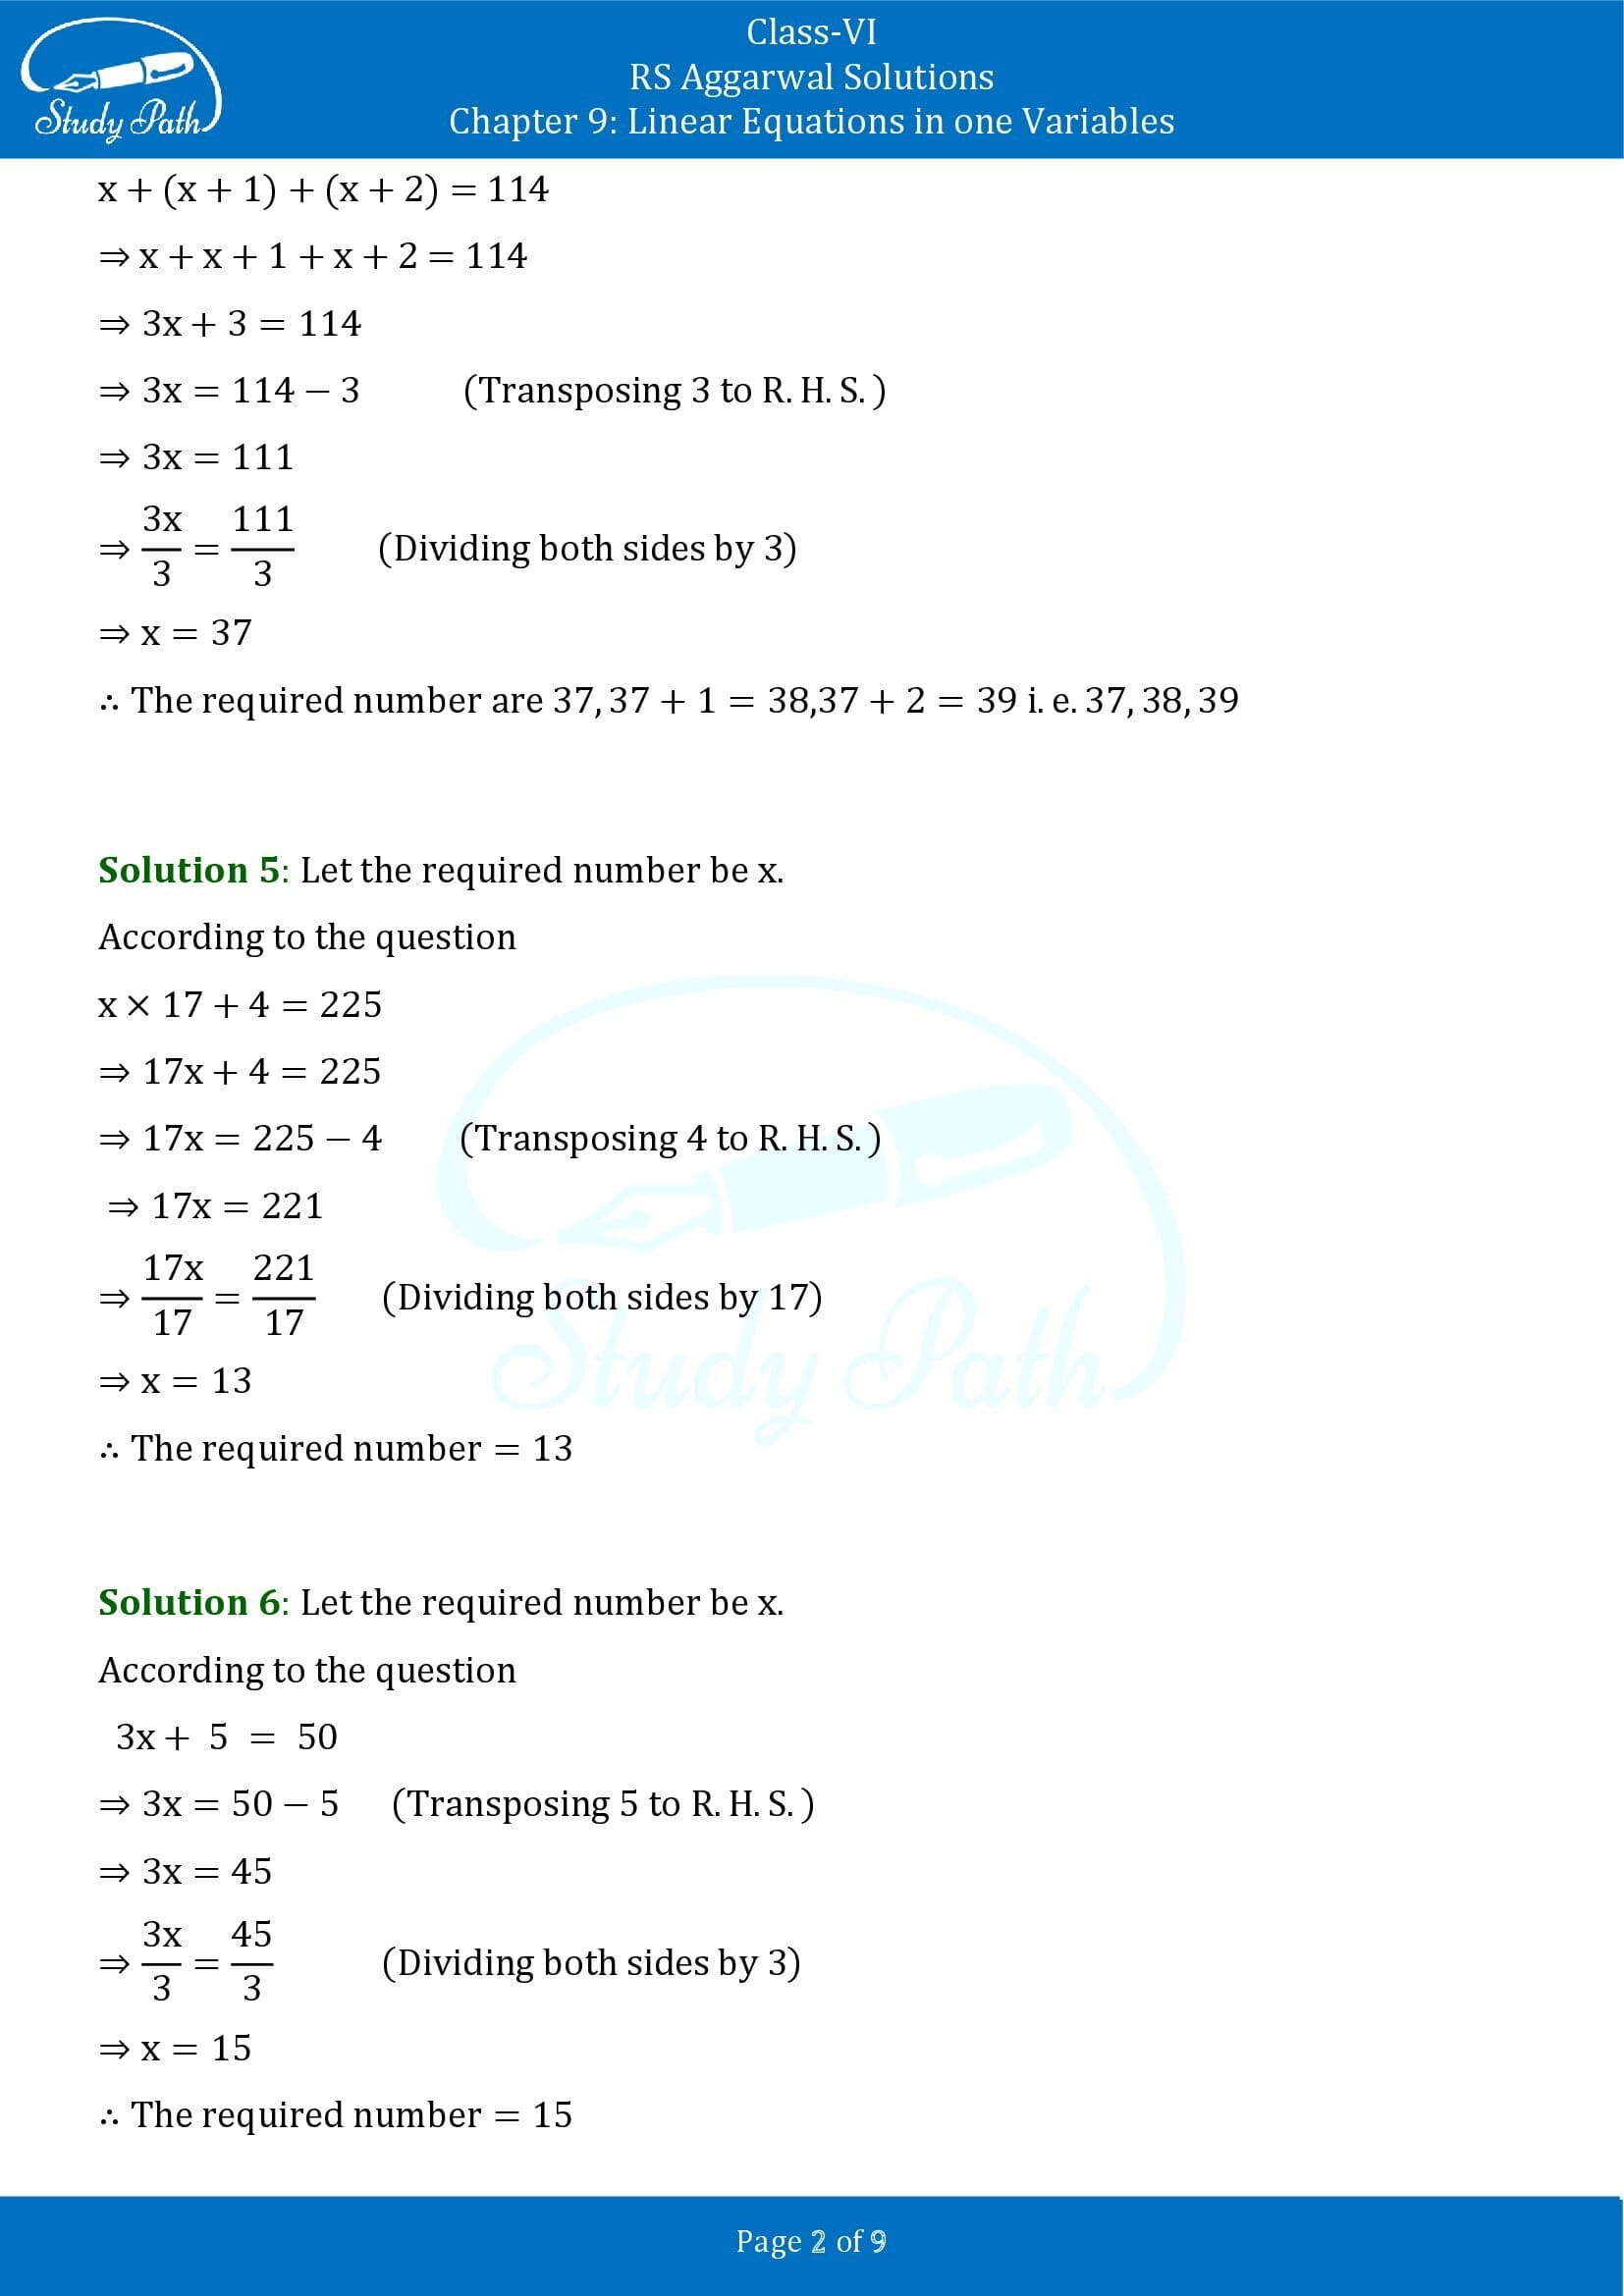 RS Aggarwal Solutions Class 6 Chapter 9 Linear Equations in One Variable Exercise 9C 00002